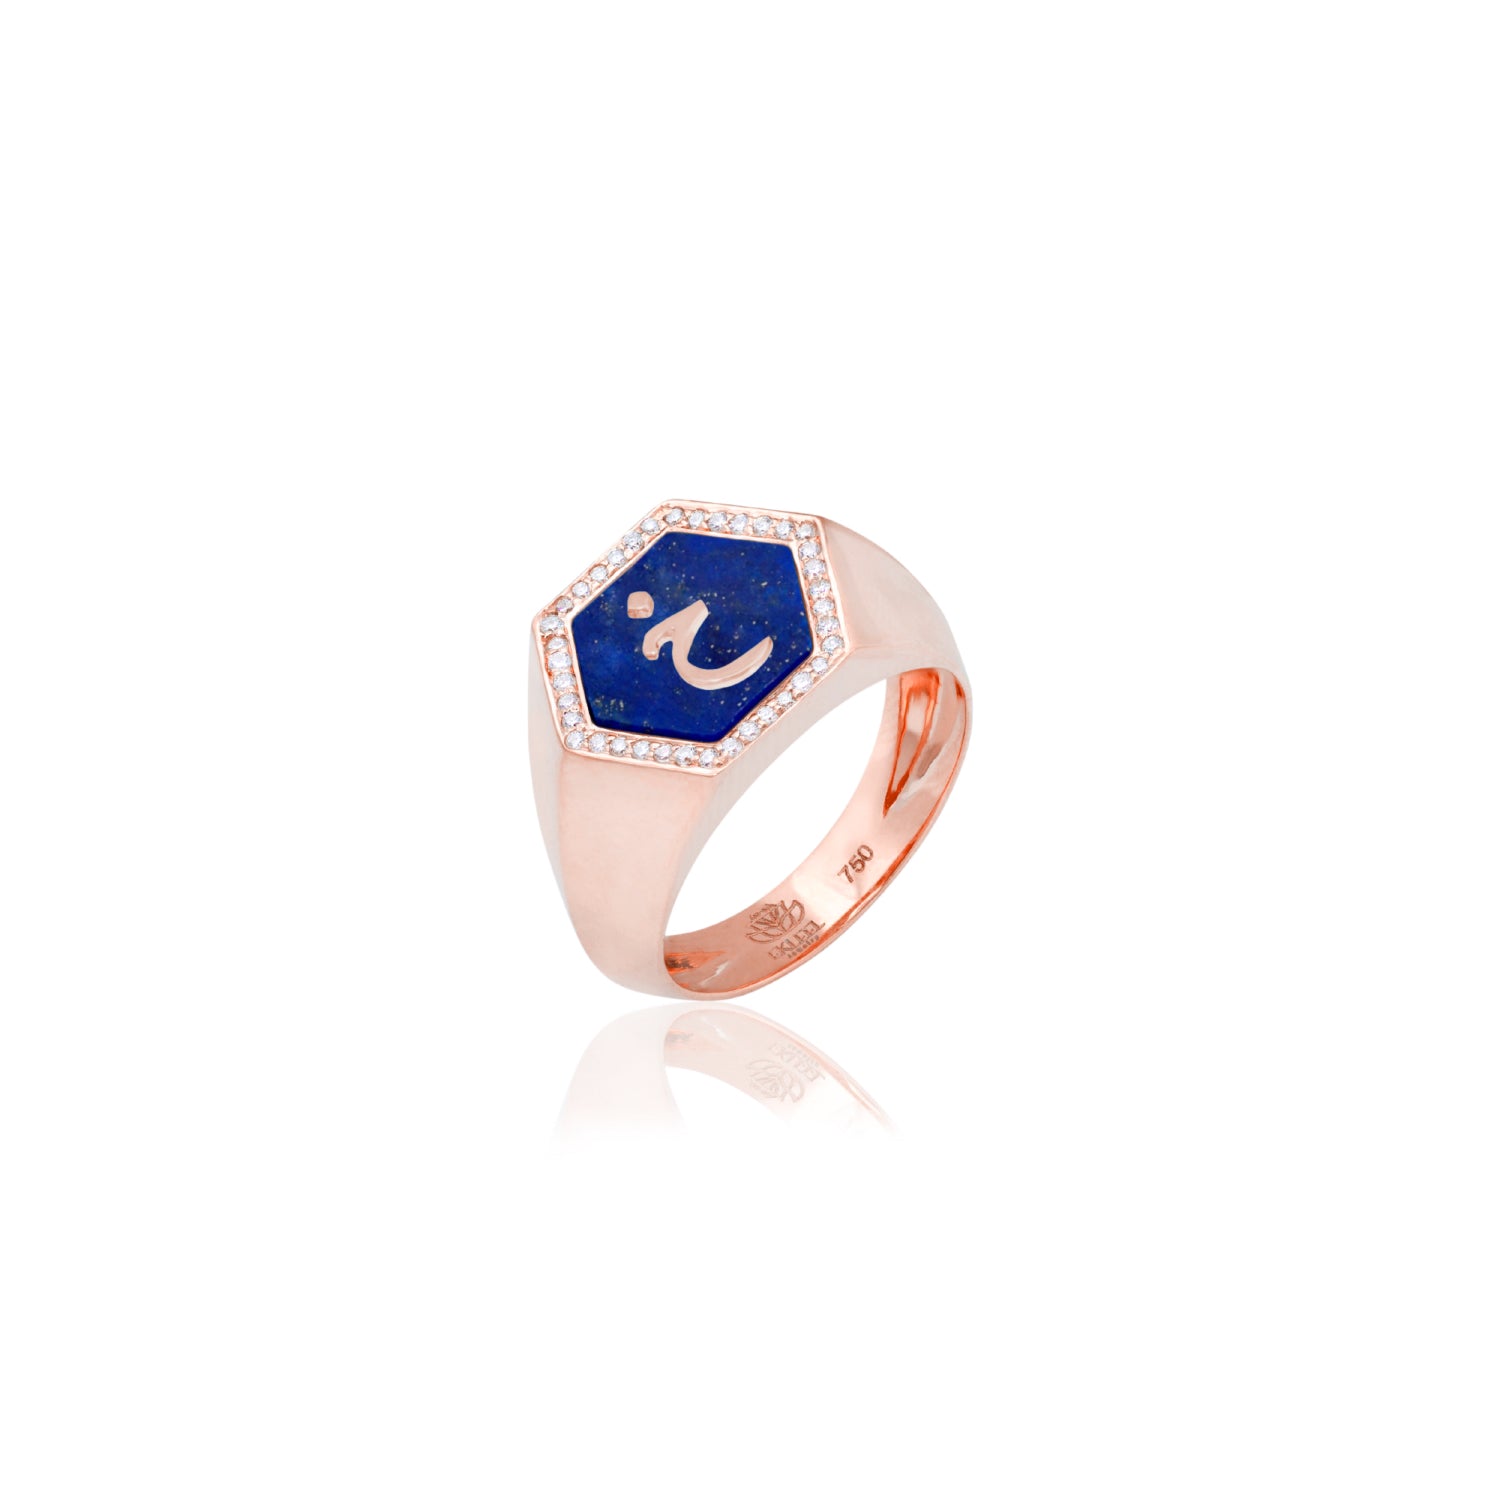 Qamoos 2.0 Letter خ Lapis Lazuli and Diamond Signet Ring in Rose Gold